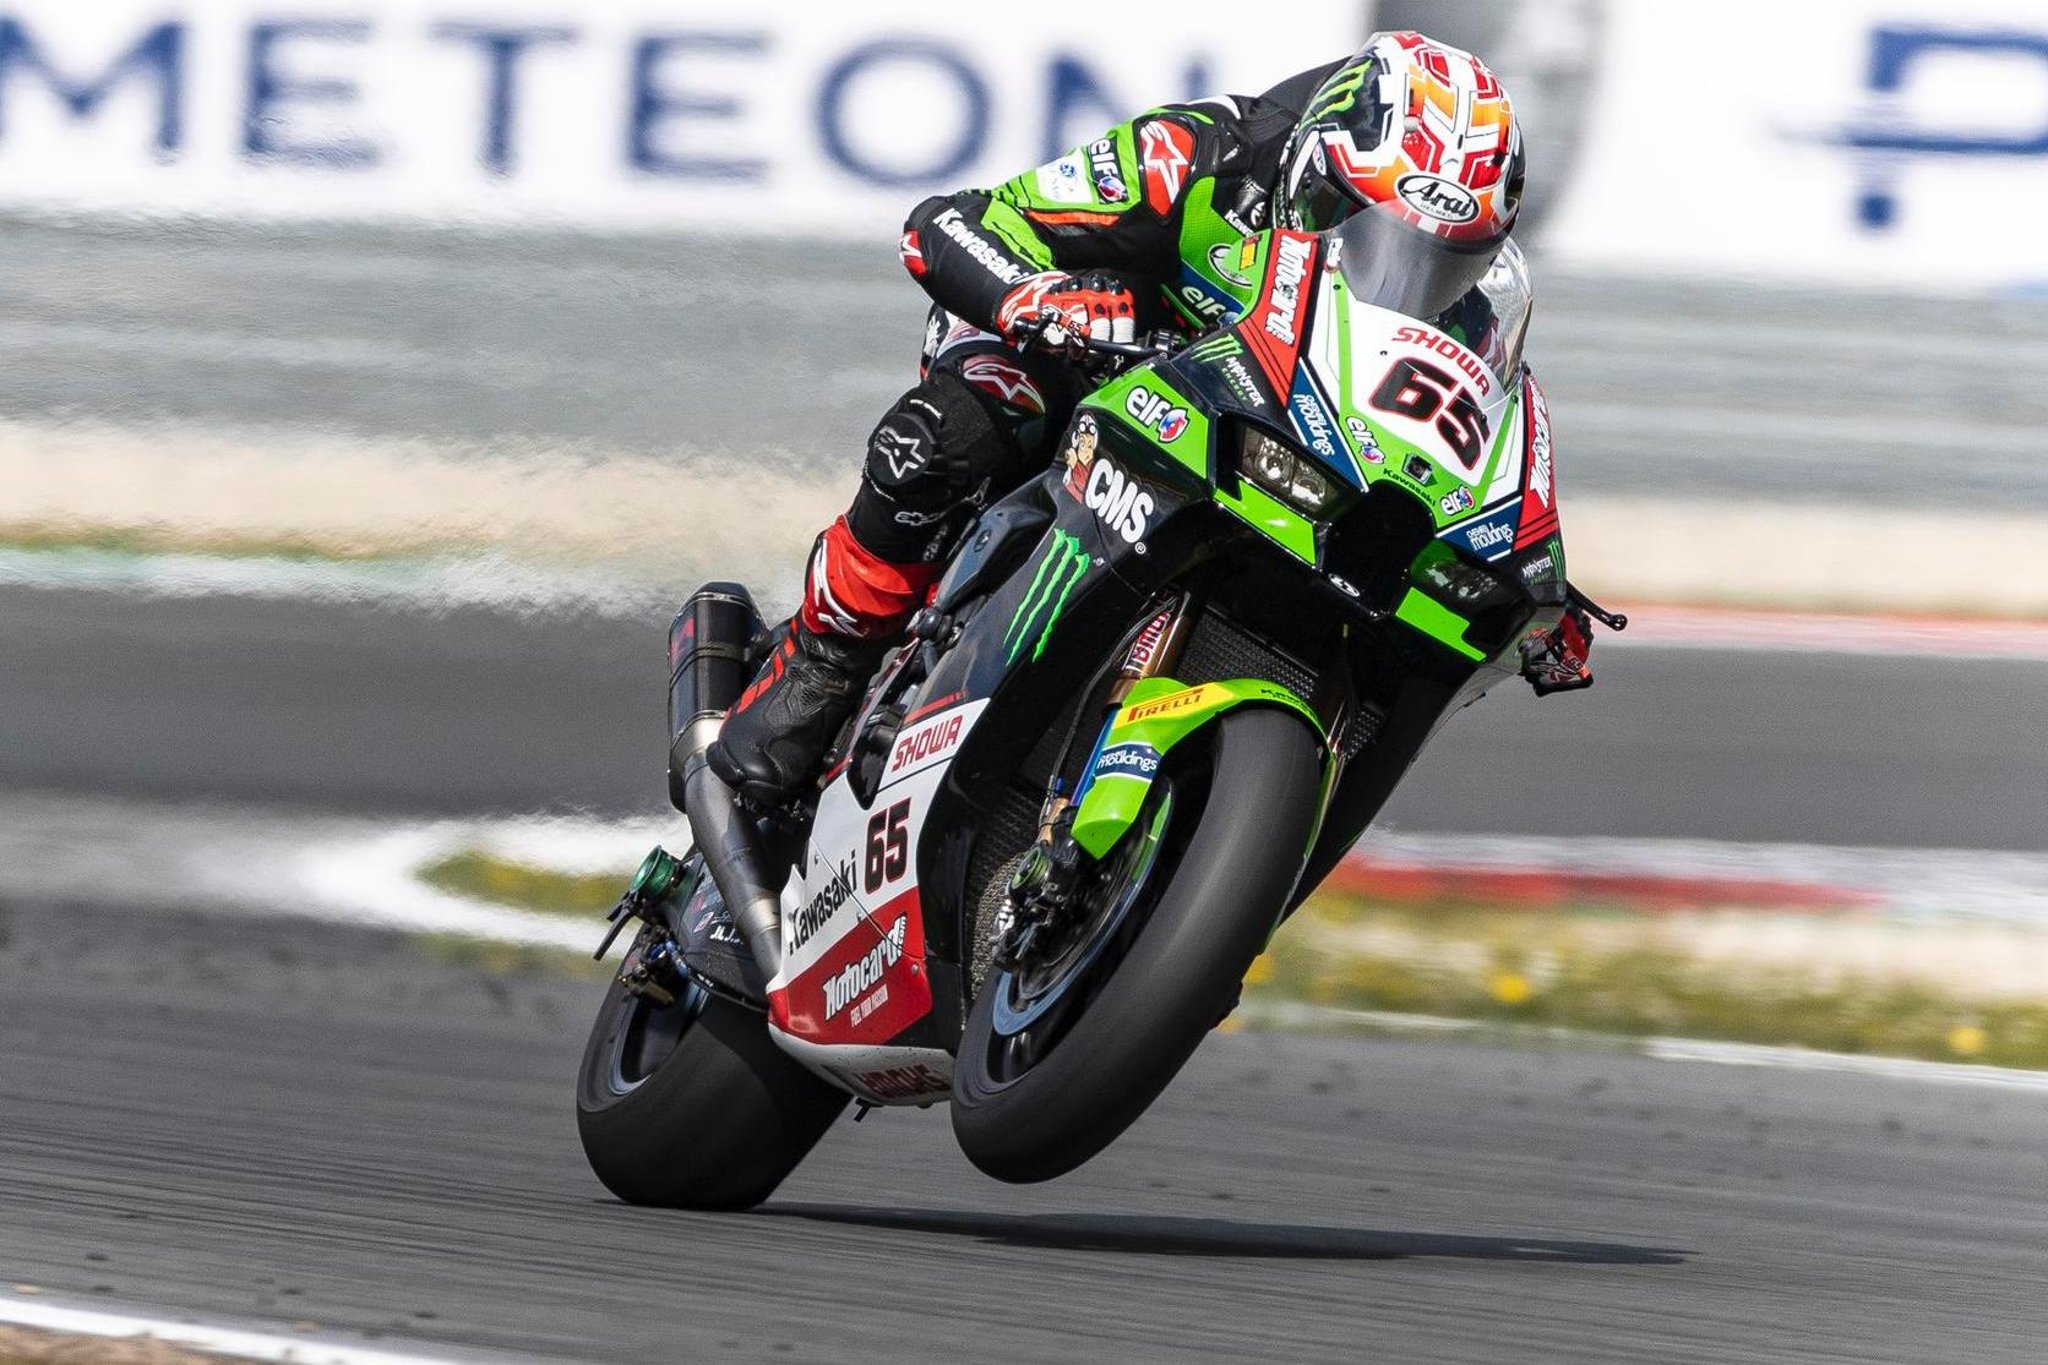 Jonathan Rea 'having nightmares' over long straight and Ducati top-speed edge ahead of World Superbike round at Estoril